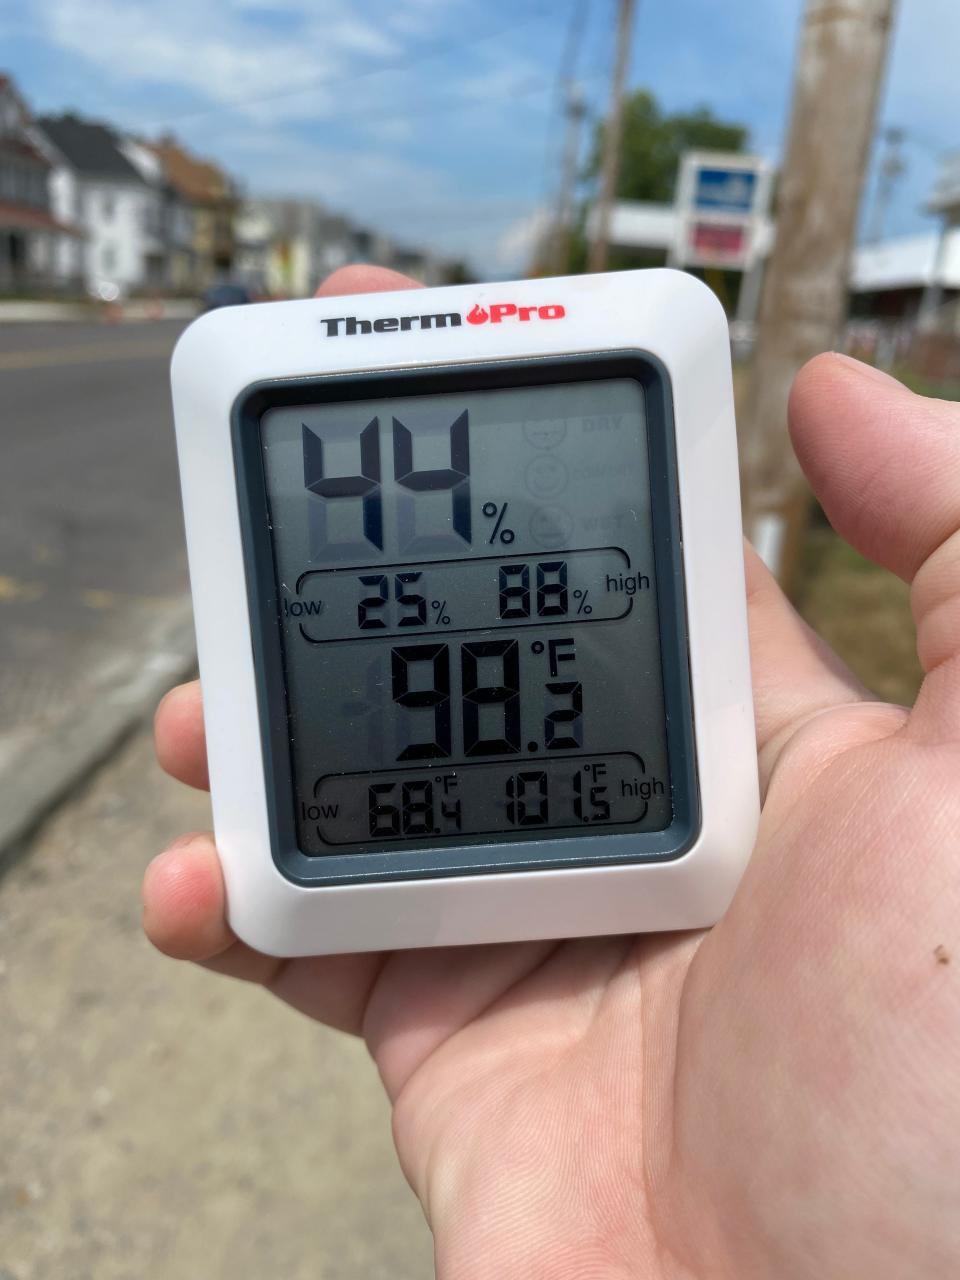 The temperature on Broadway between Adams and Dartmouth streets on Friday, Aug. 5, 2022 at 1:50 p.m. was 98.2F.